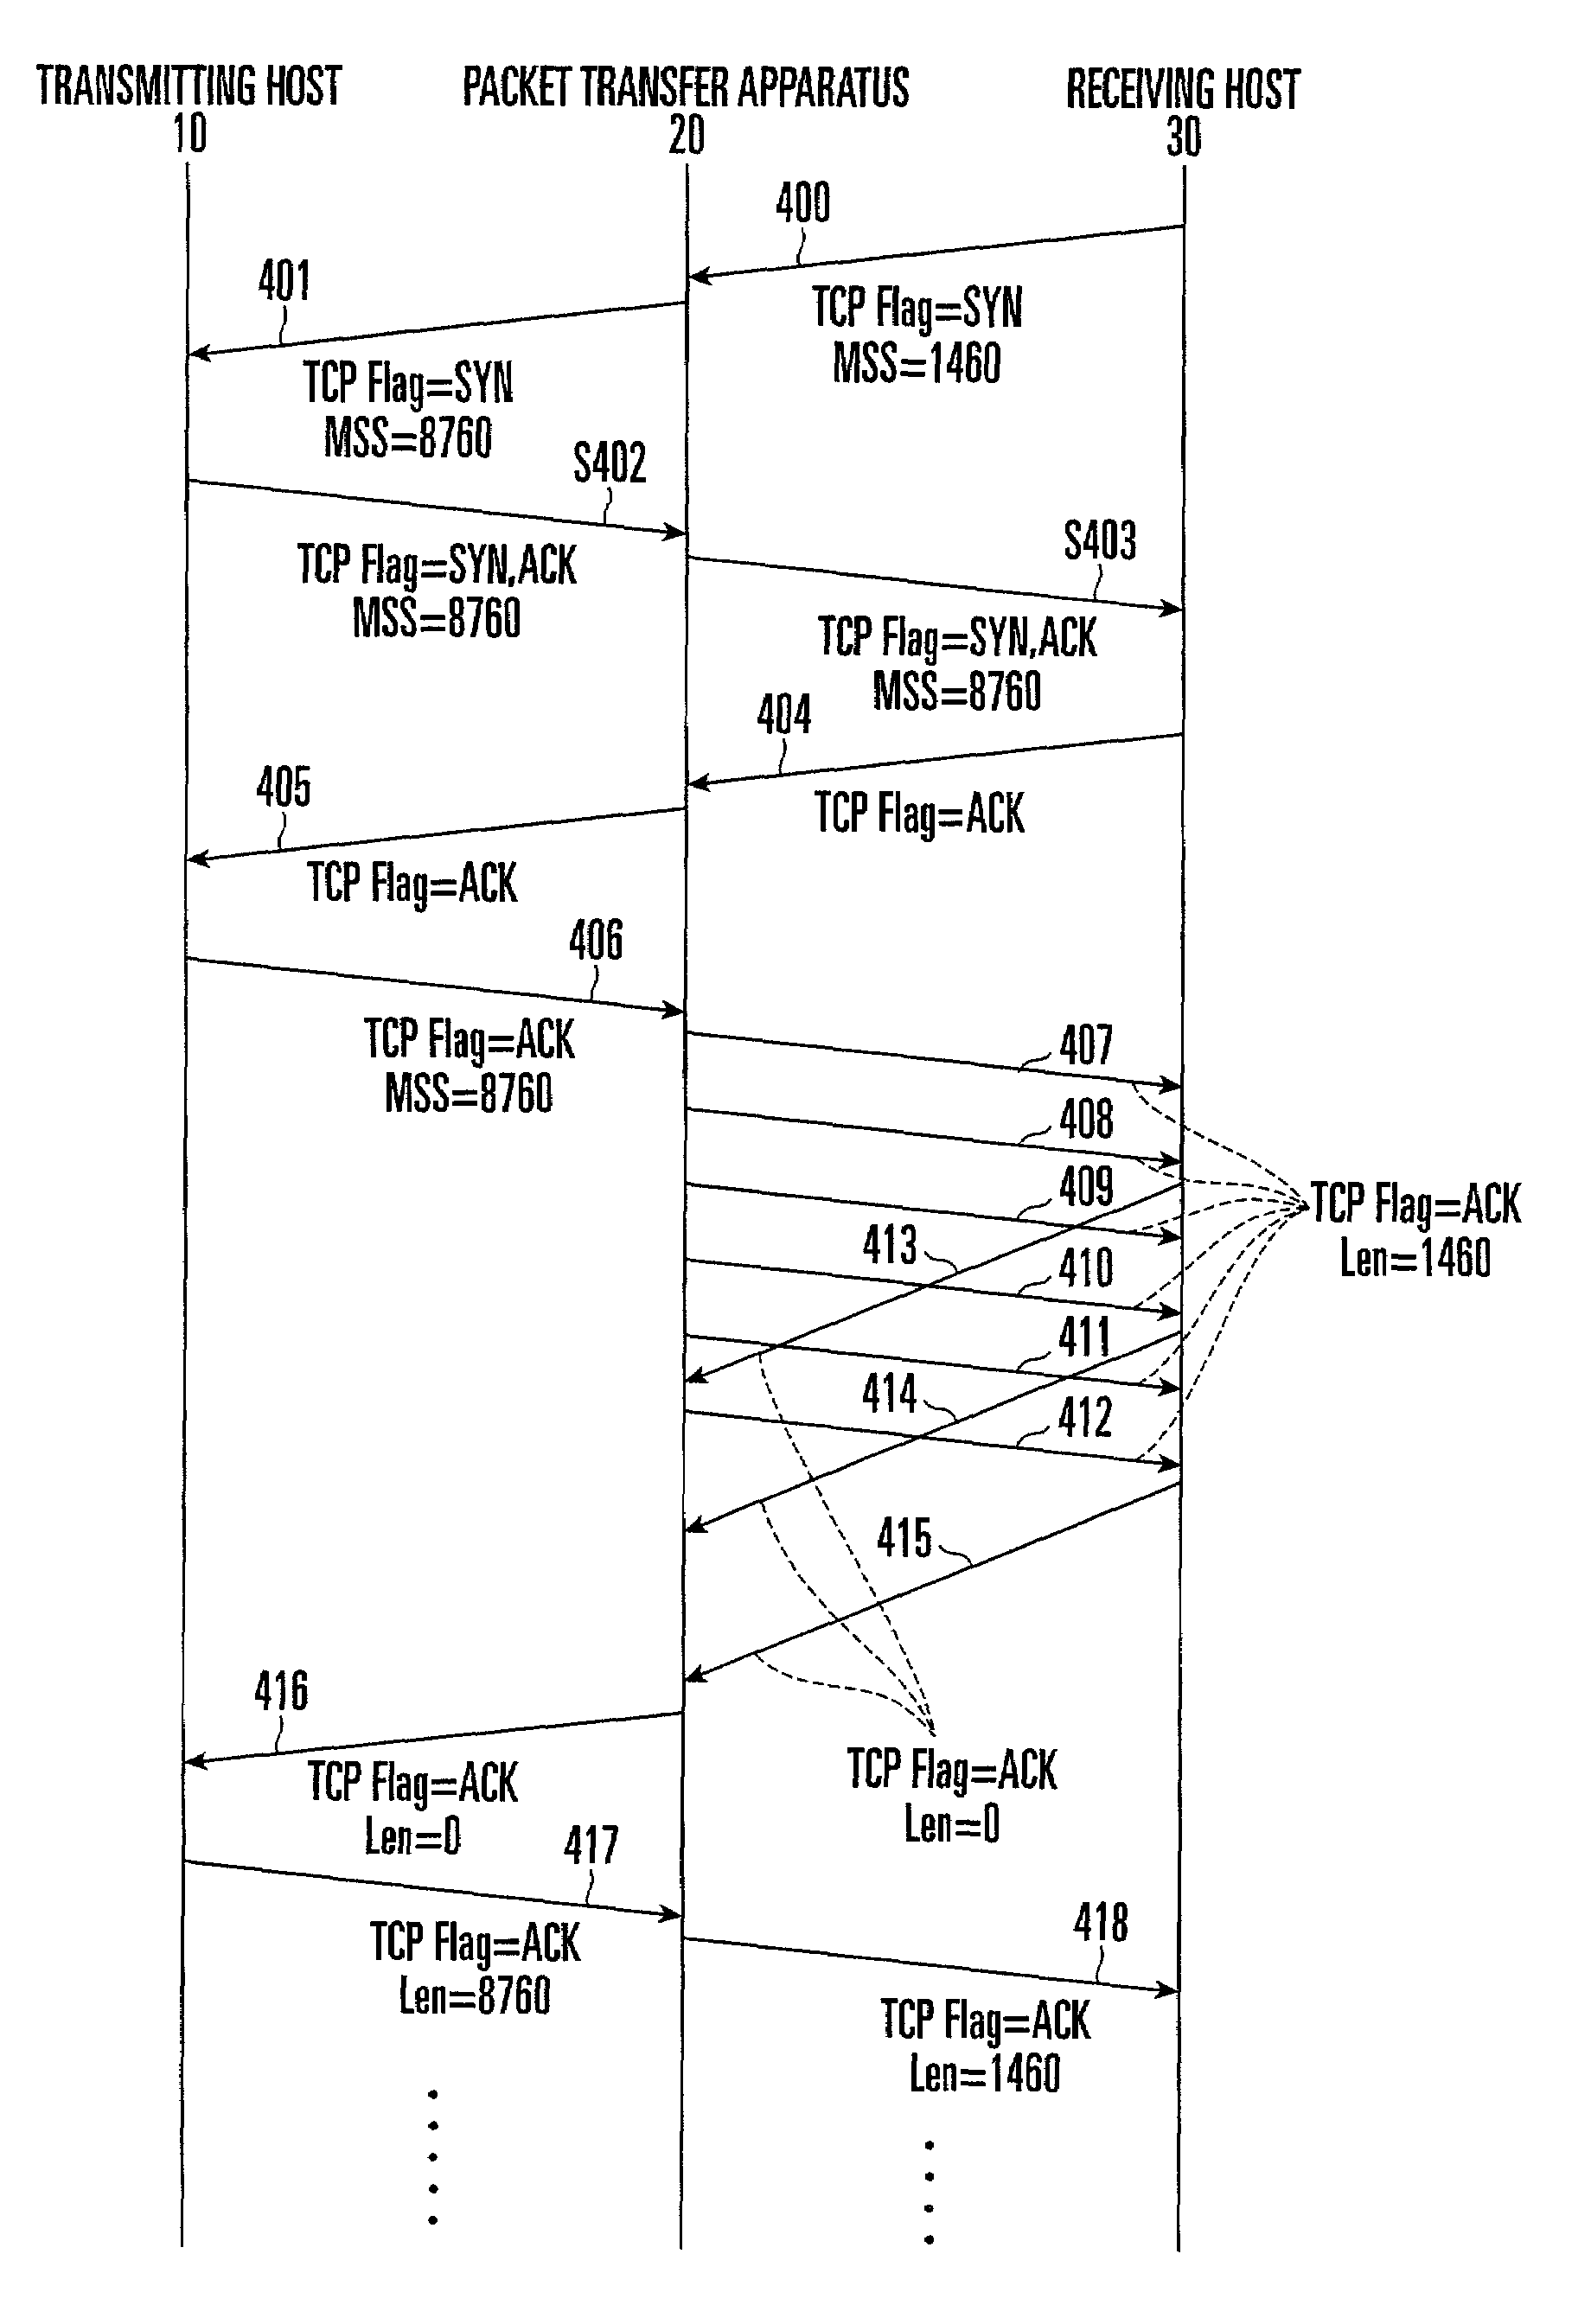 Packet transfer apparatus and method